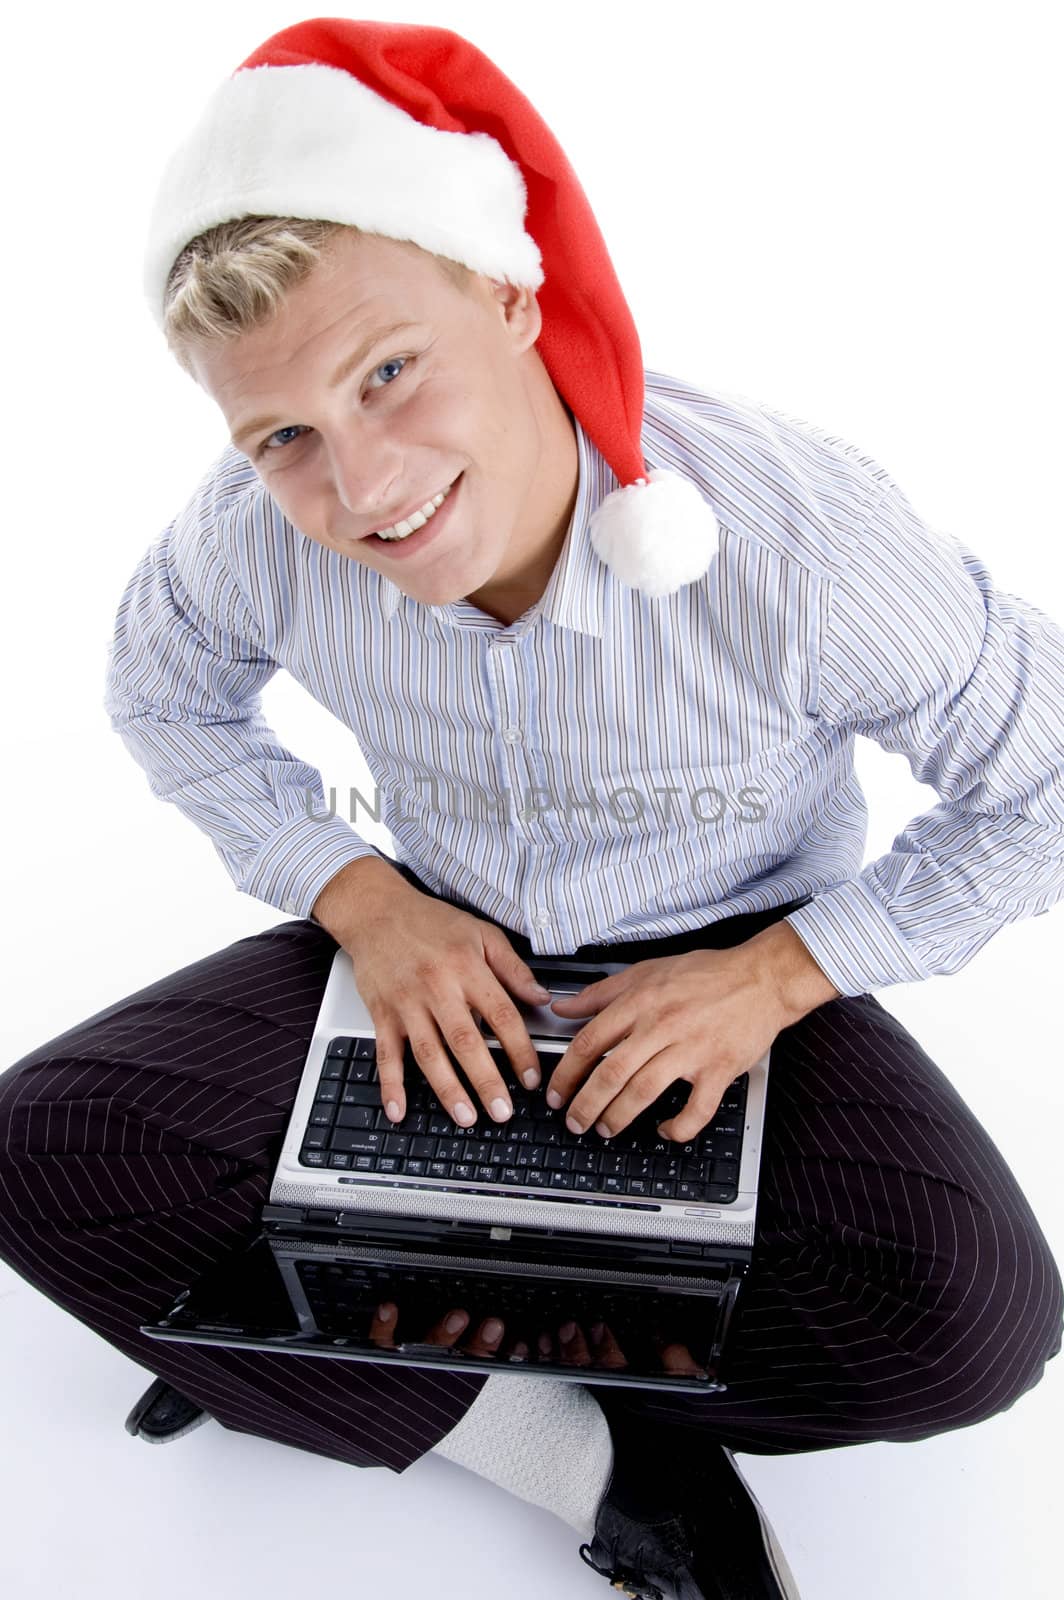 male working on laptop and looking to camera against white background